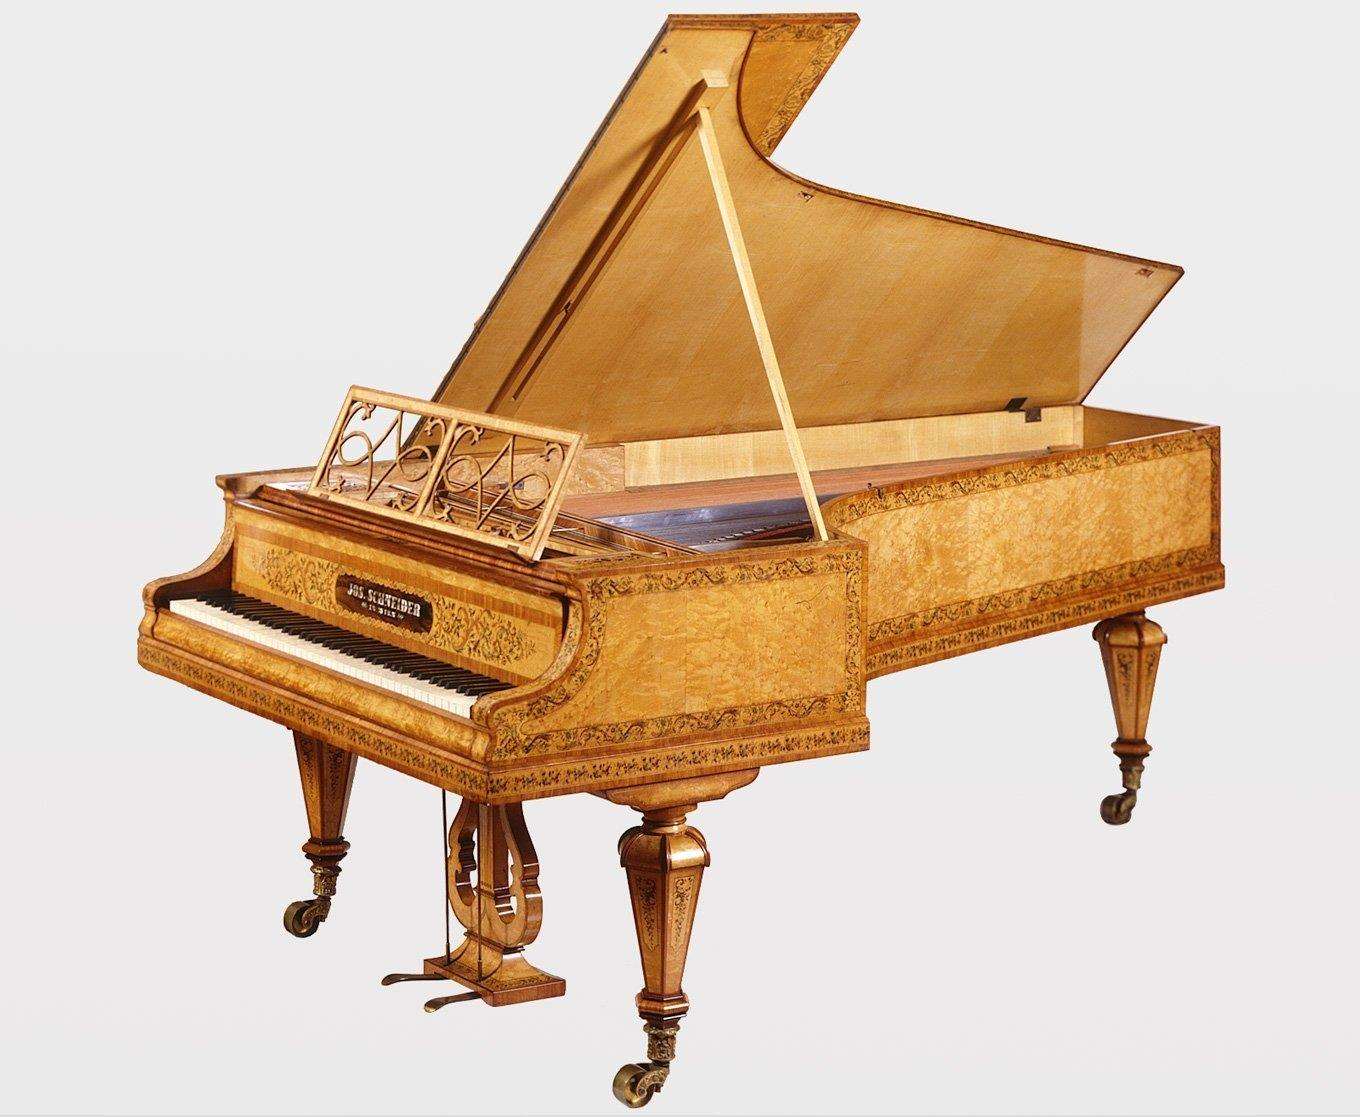 A guide price of £20,000 to £30,000 was put on this Schneider piano